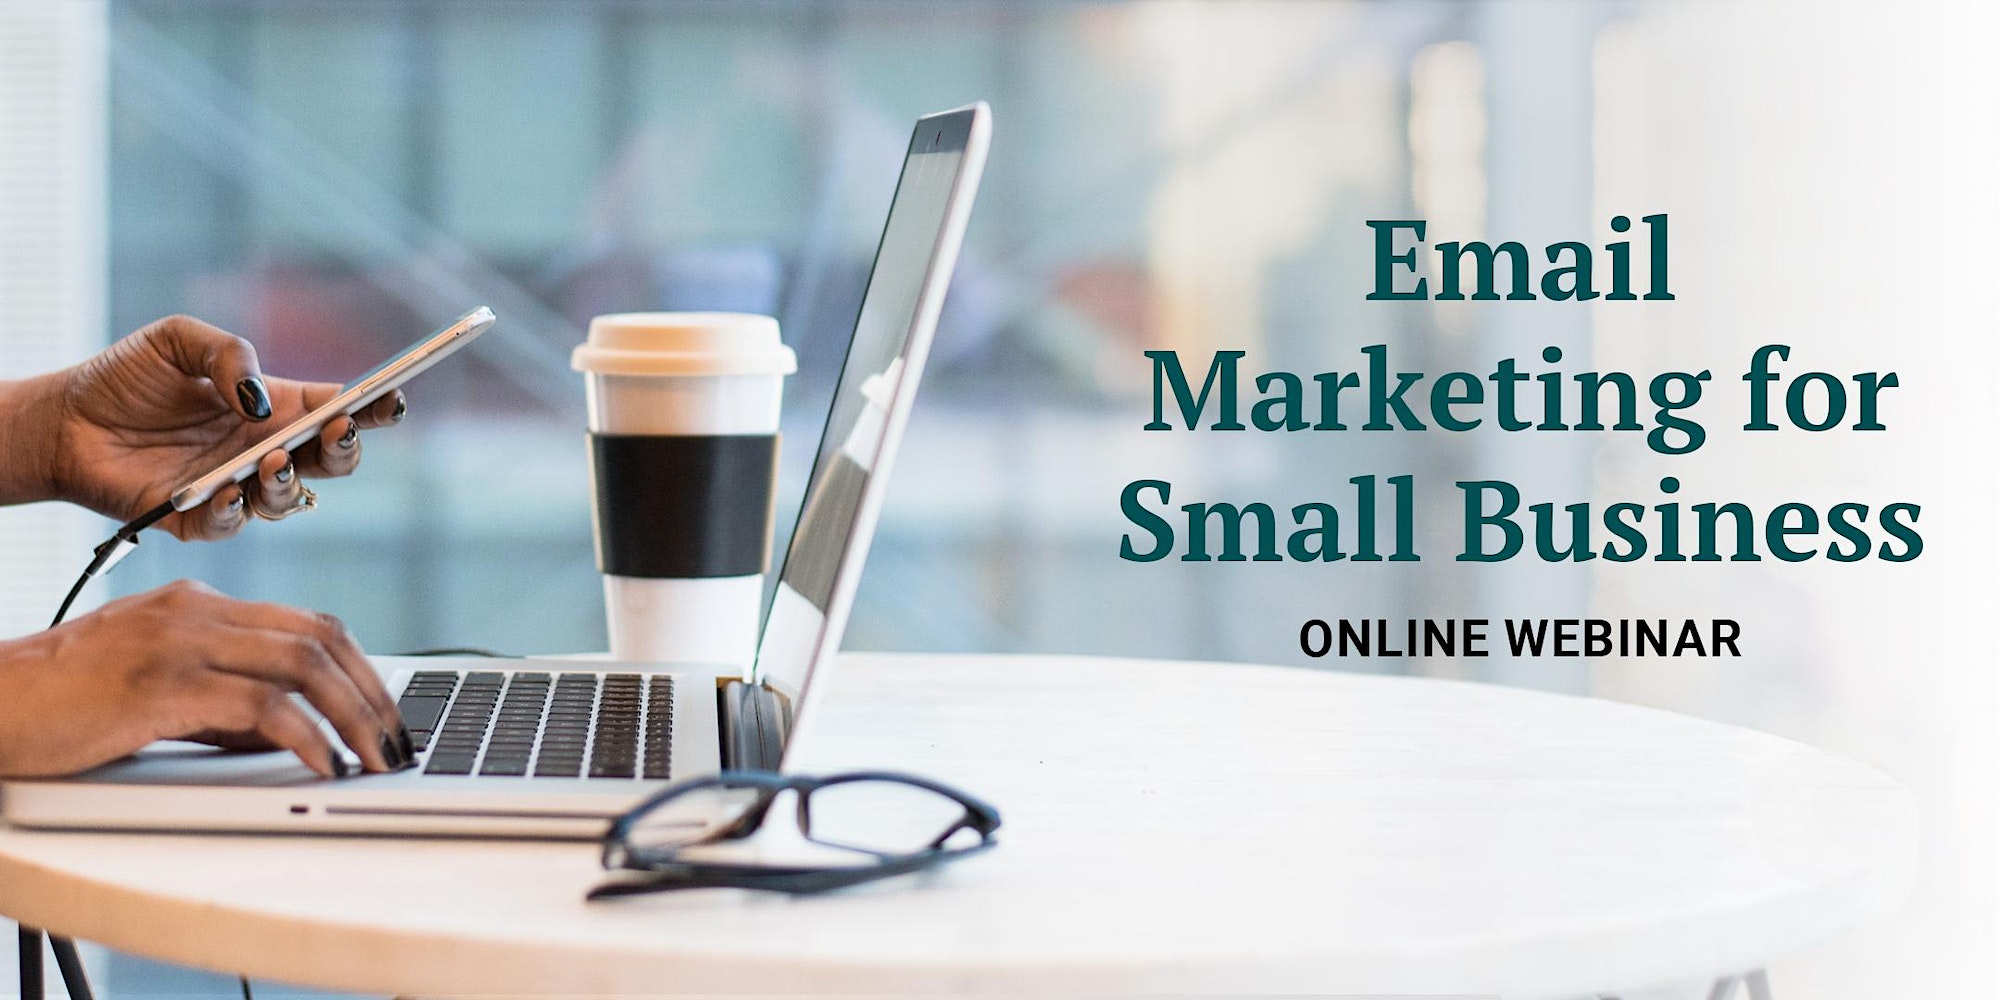 Email Marketing for Small Business: Online Webinar